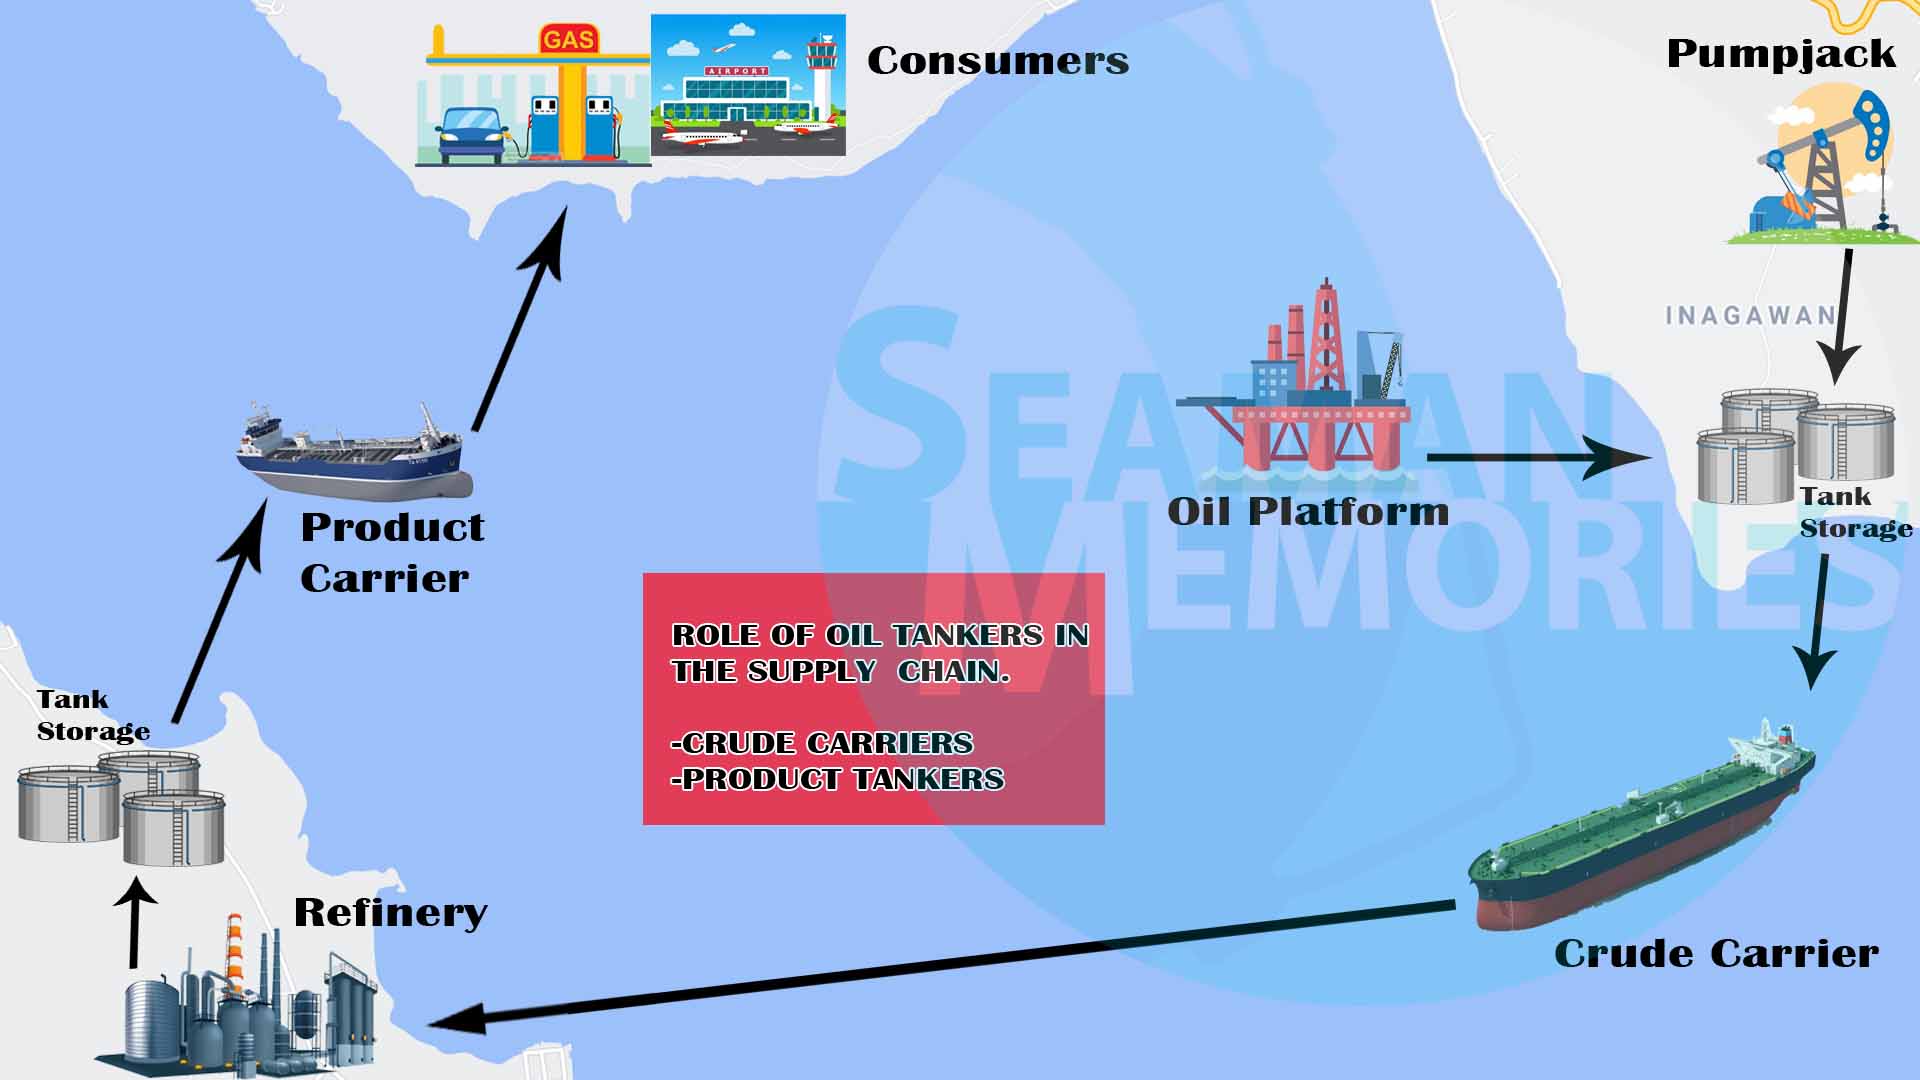 Oil tankers' position in the global supply chain. Oil from sea platforms and pumpjacks are stored in refineries. Crude oil carriers carry them to other country's refineries. Once refined, they are transported to the consumers from other countries using product tankers of different sizes.